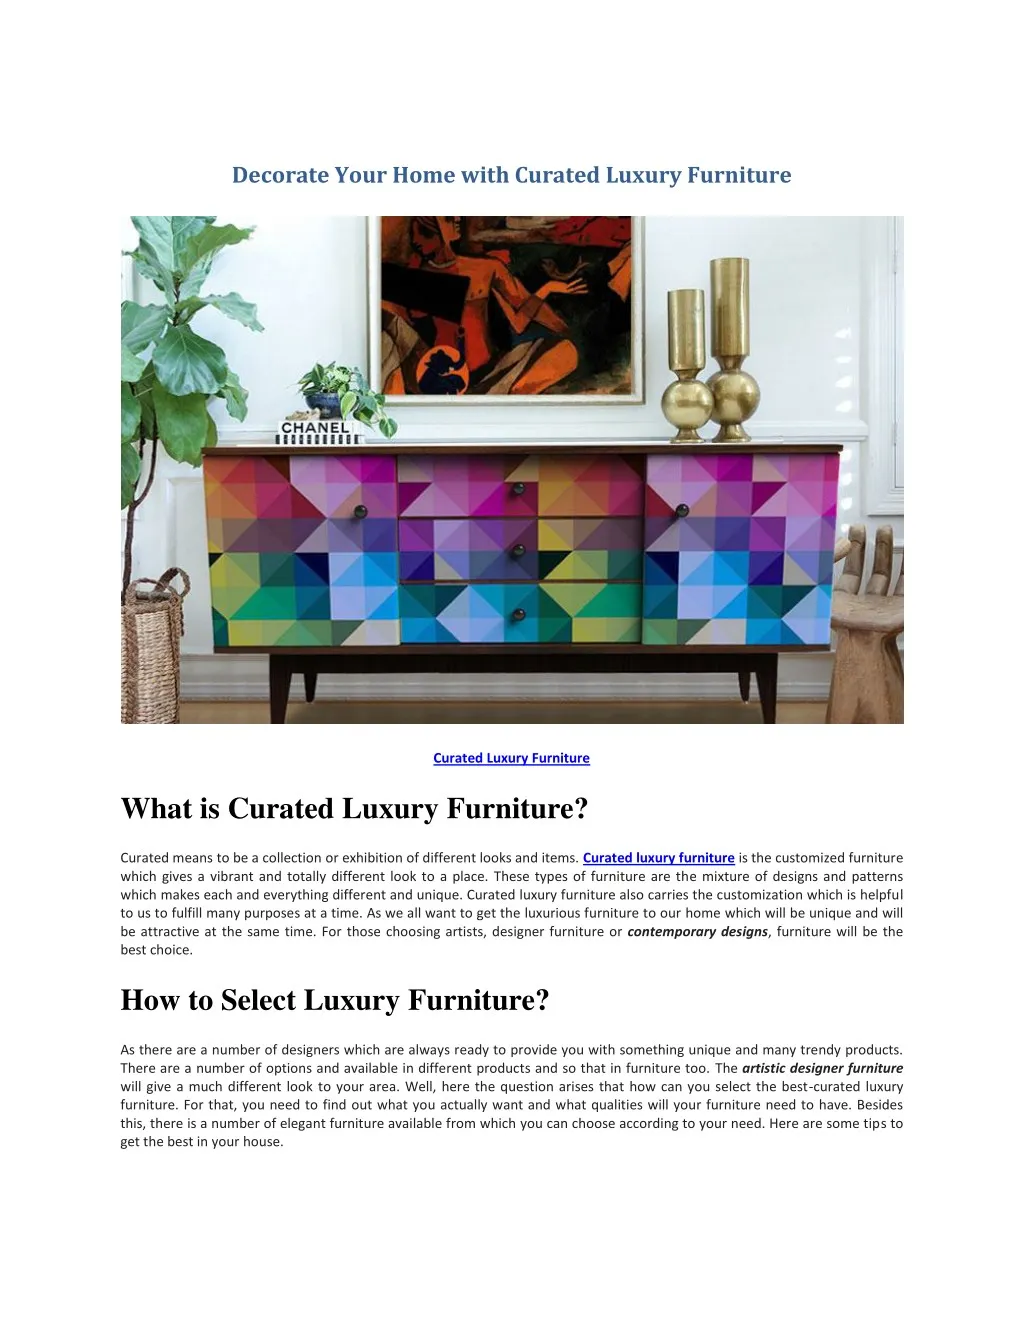 decorate your home with curated luxury furniture